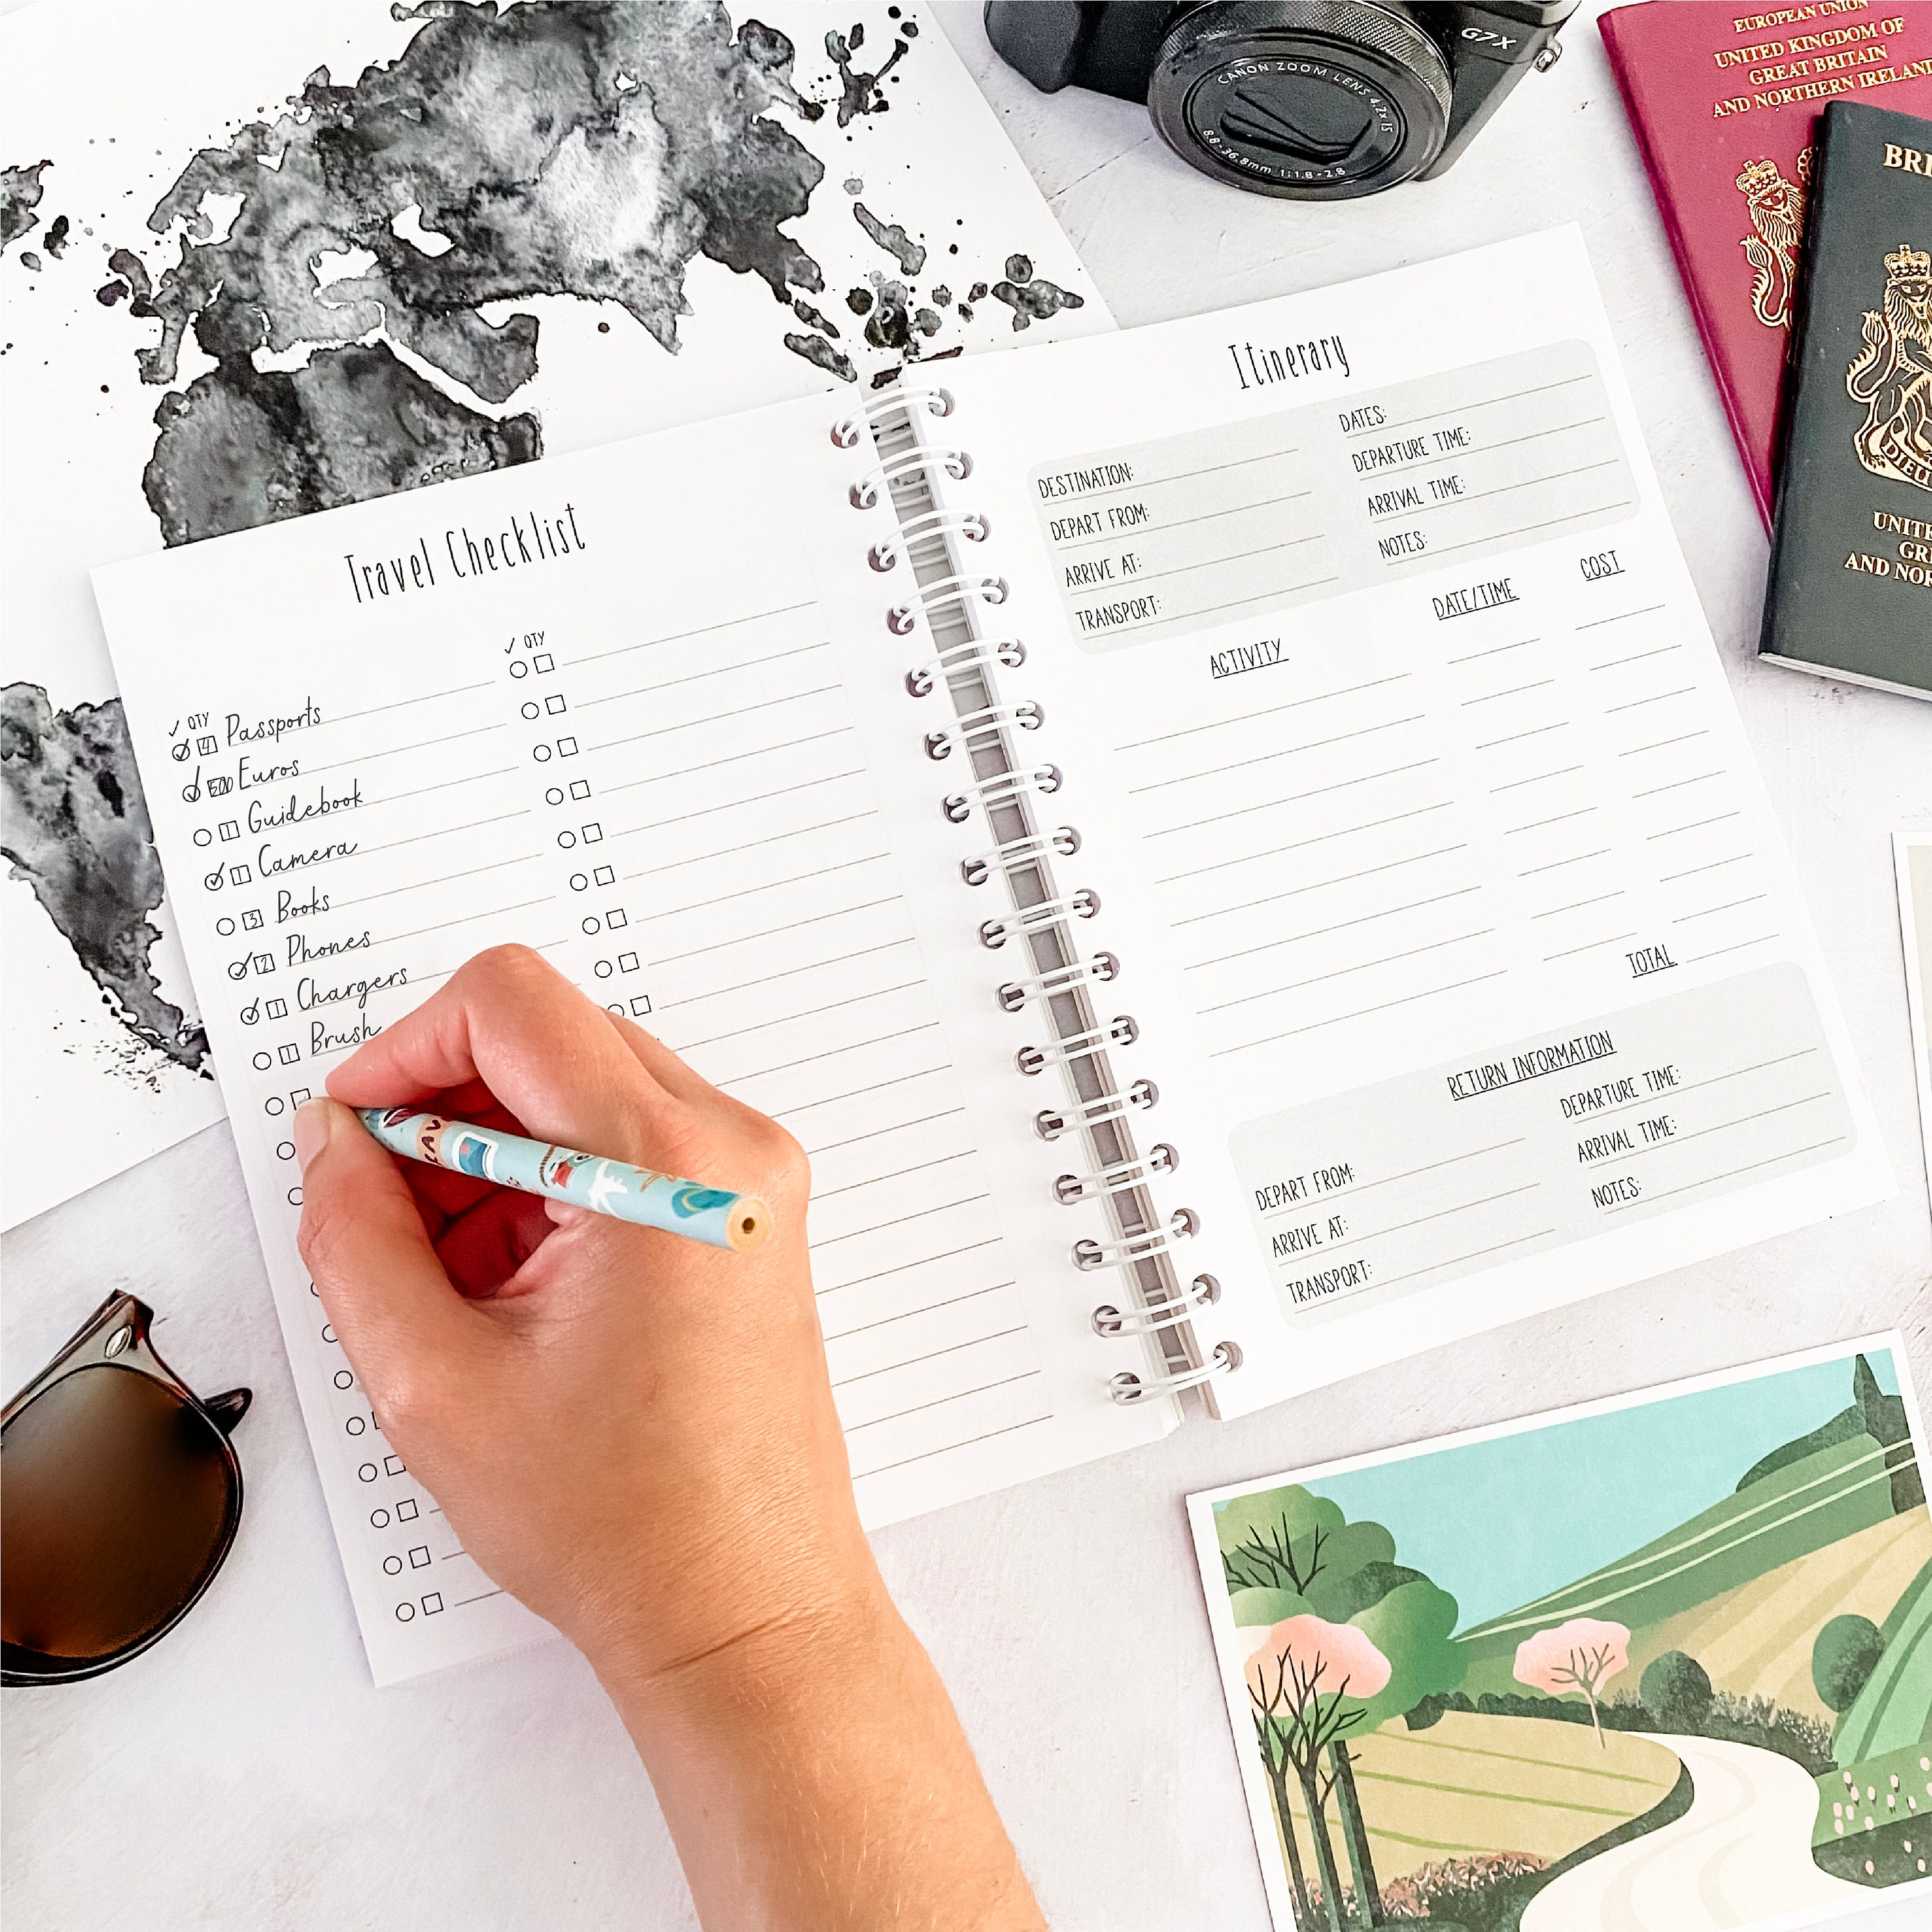 Travel Journal: Vintage Travel Journal For Couples To Keep Track And  Document All Your Travel itineraries, experiences and memories. Vacation  planner  memorable Event and Things To Do.: studio, Design:  9798484334582: 